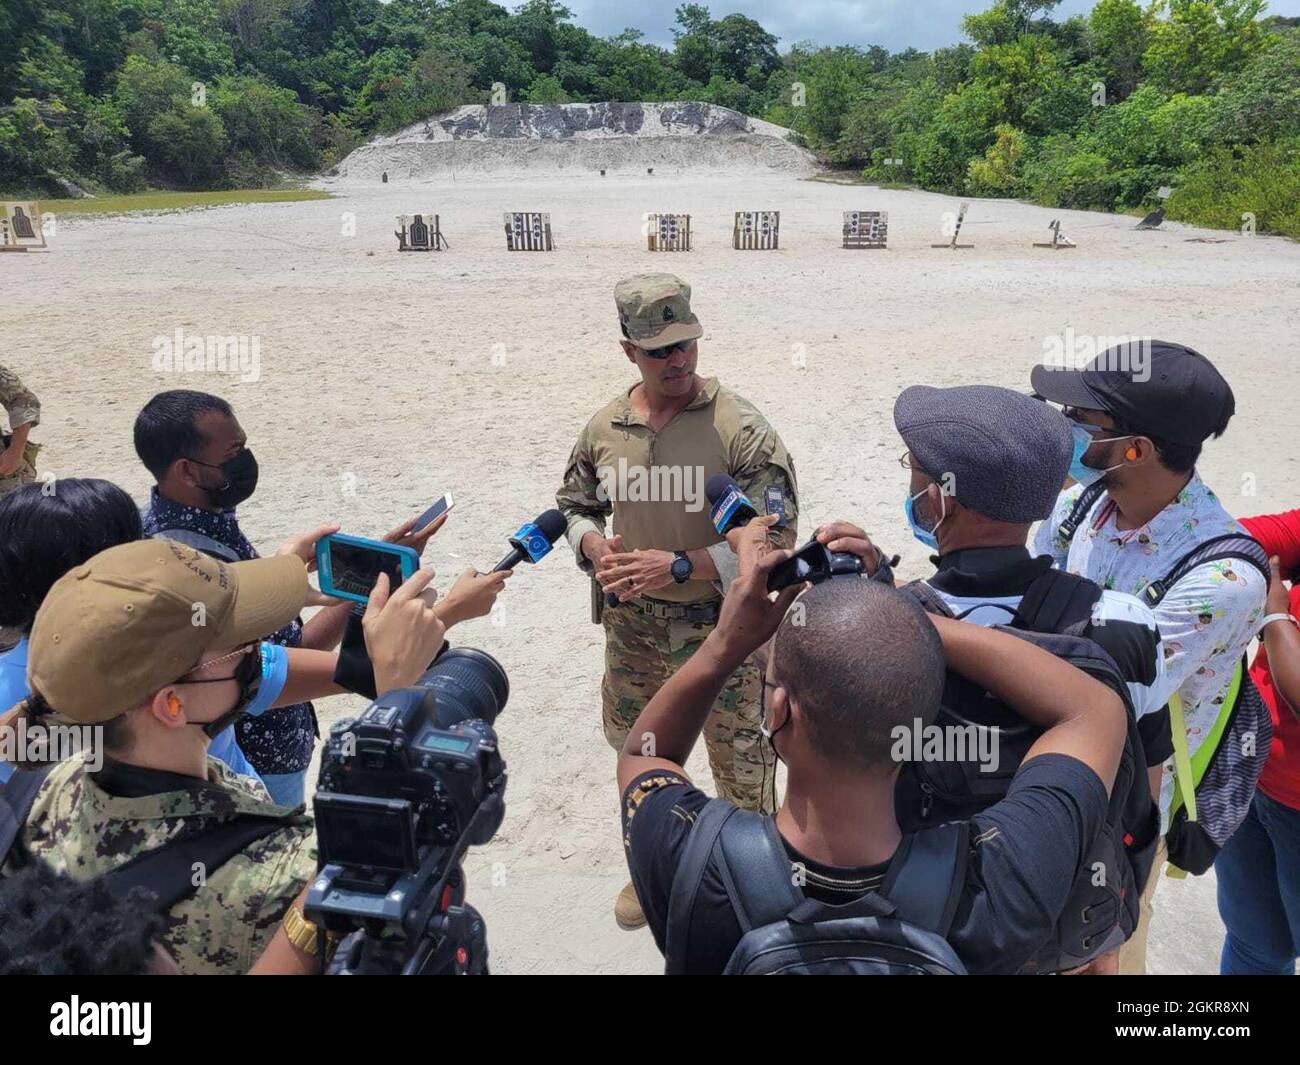 210618-N-YY107-001 CAMP STEPHENSON, Guyana - (June 18, 2021) Sgt. First Class Anthony Calvi of Charlie Co. 2-54 Security Force Assistance Brigade (SFAB) talks with Guyanese media about training operations during exercise Tradewinds 2021. Tradewinds 2021 is Caribbean security-focused, multi-dimensional exercise conducted in the ground, air, sea, and cyber domains. U.S. forces join participating nations to conduct joint, combined, and interagency training focused on increasing regional cooperation in complex multinational security operations. Stock Photo